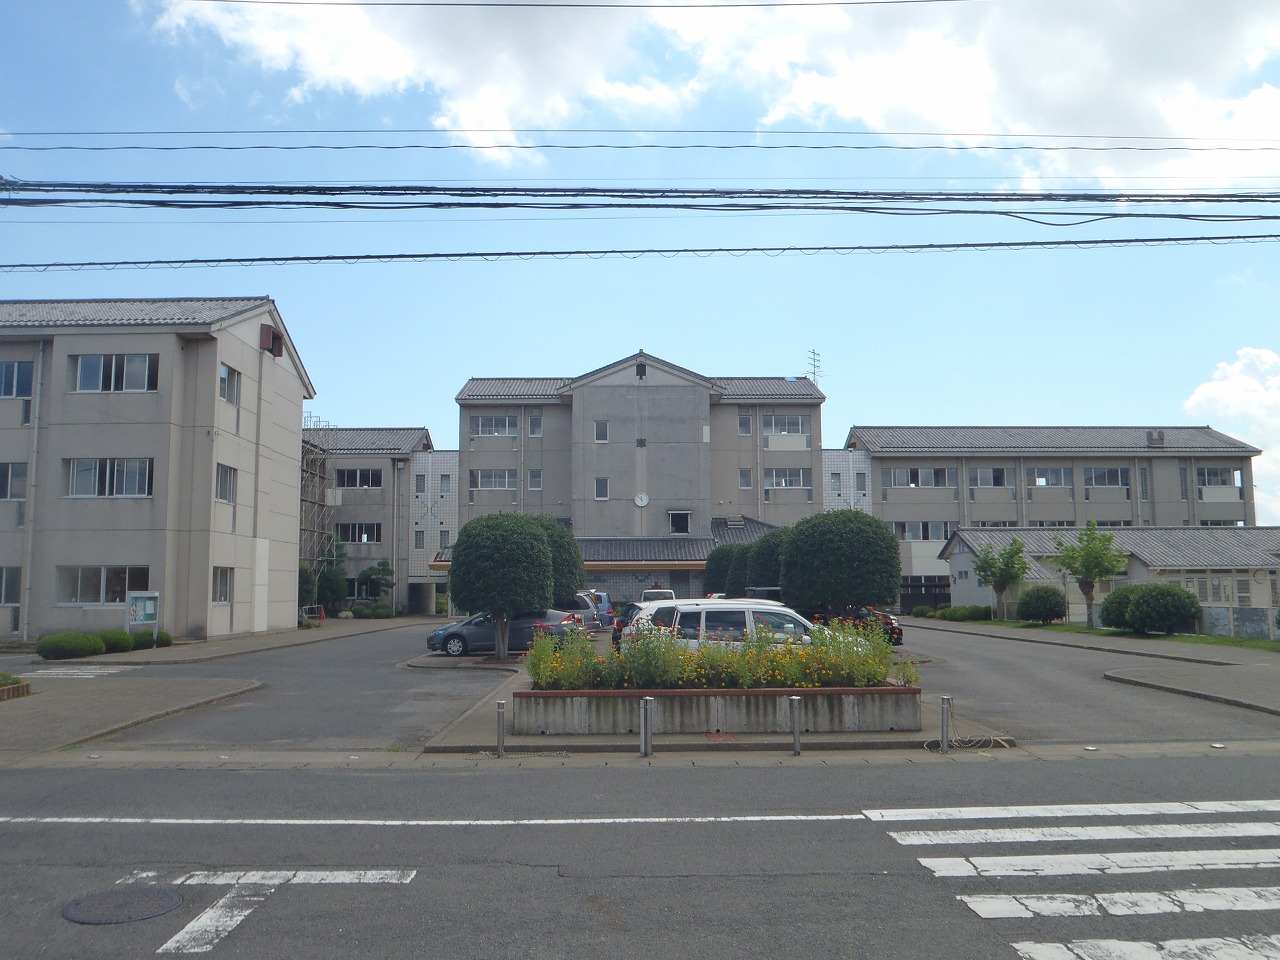 Primary school. Hitachinaka 370m to stand outfield elementary school (elementary school)